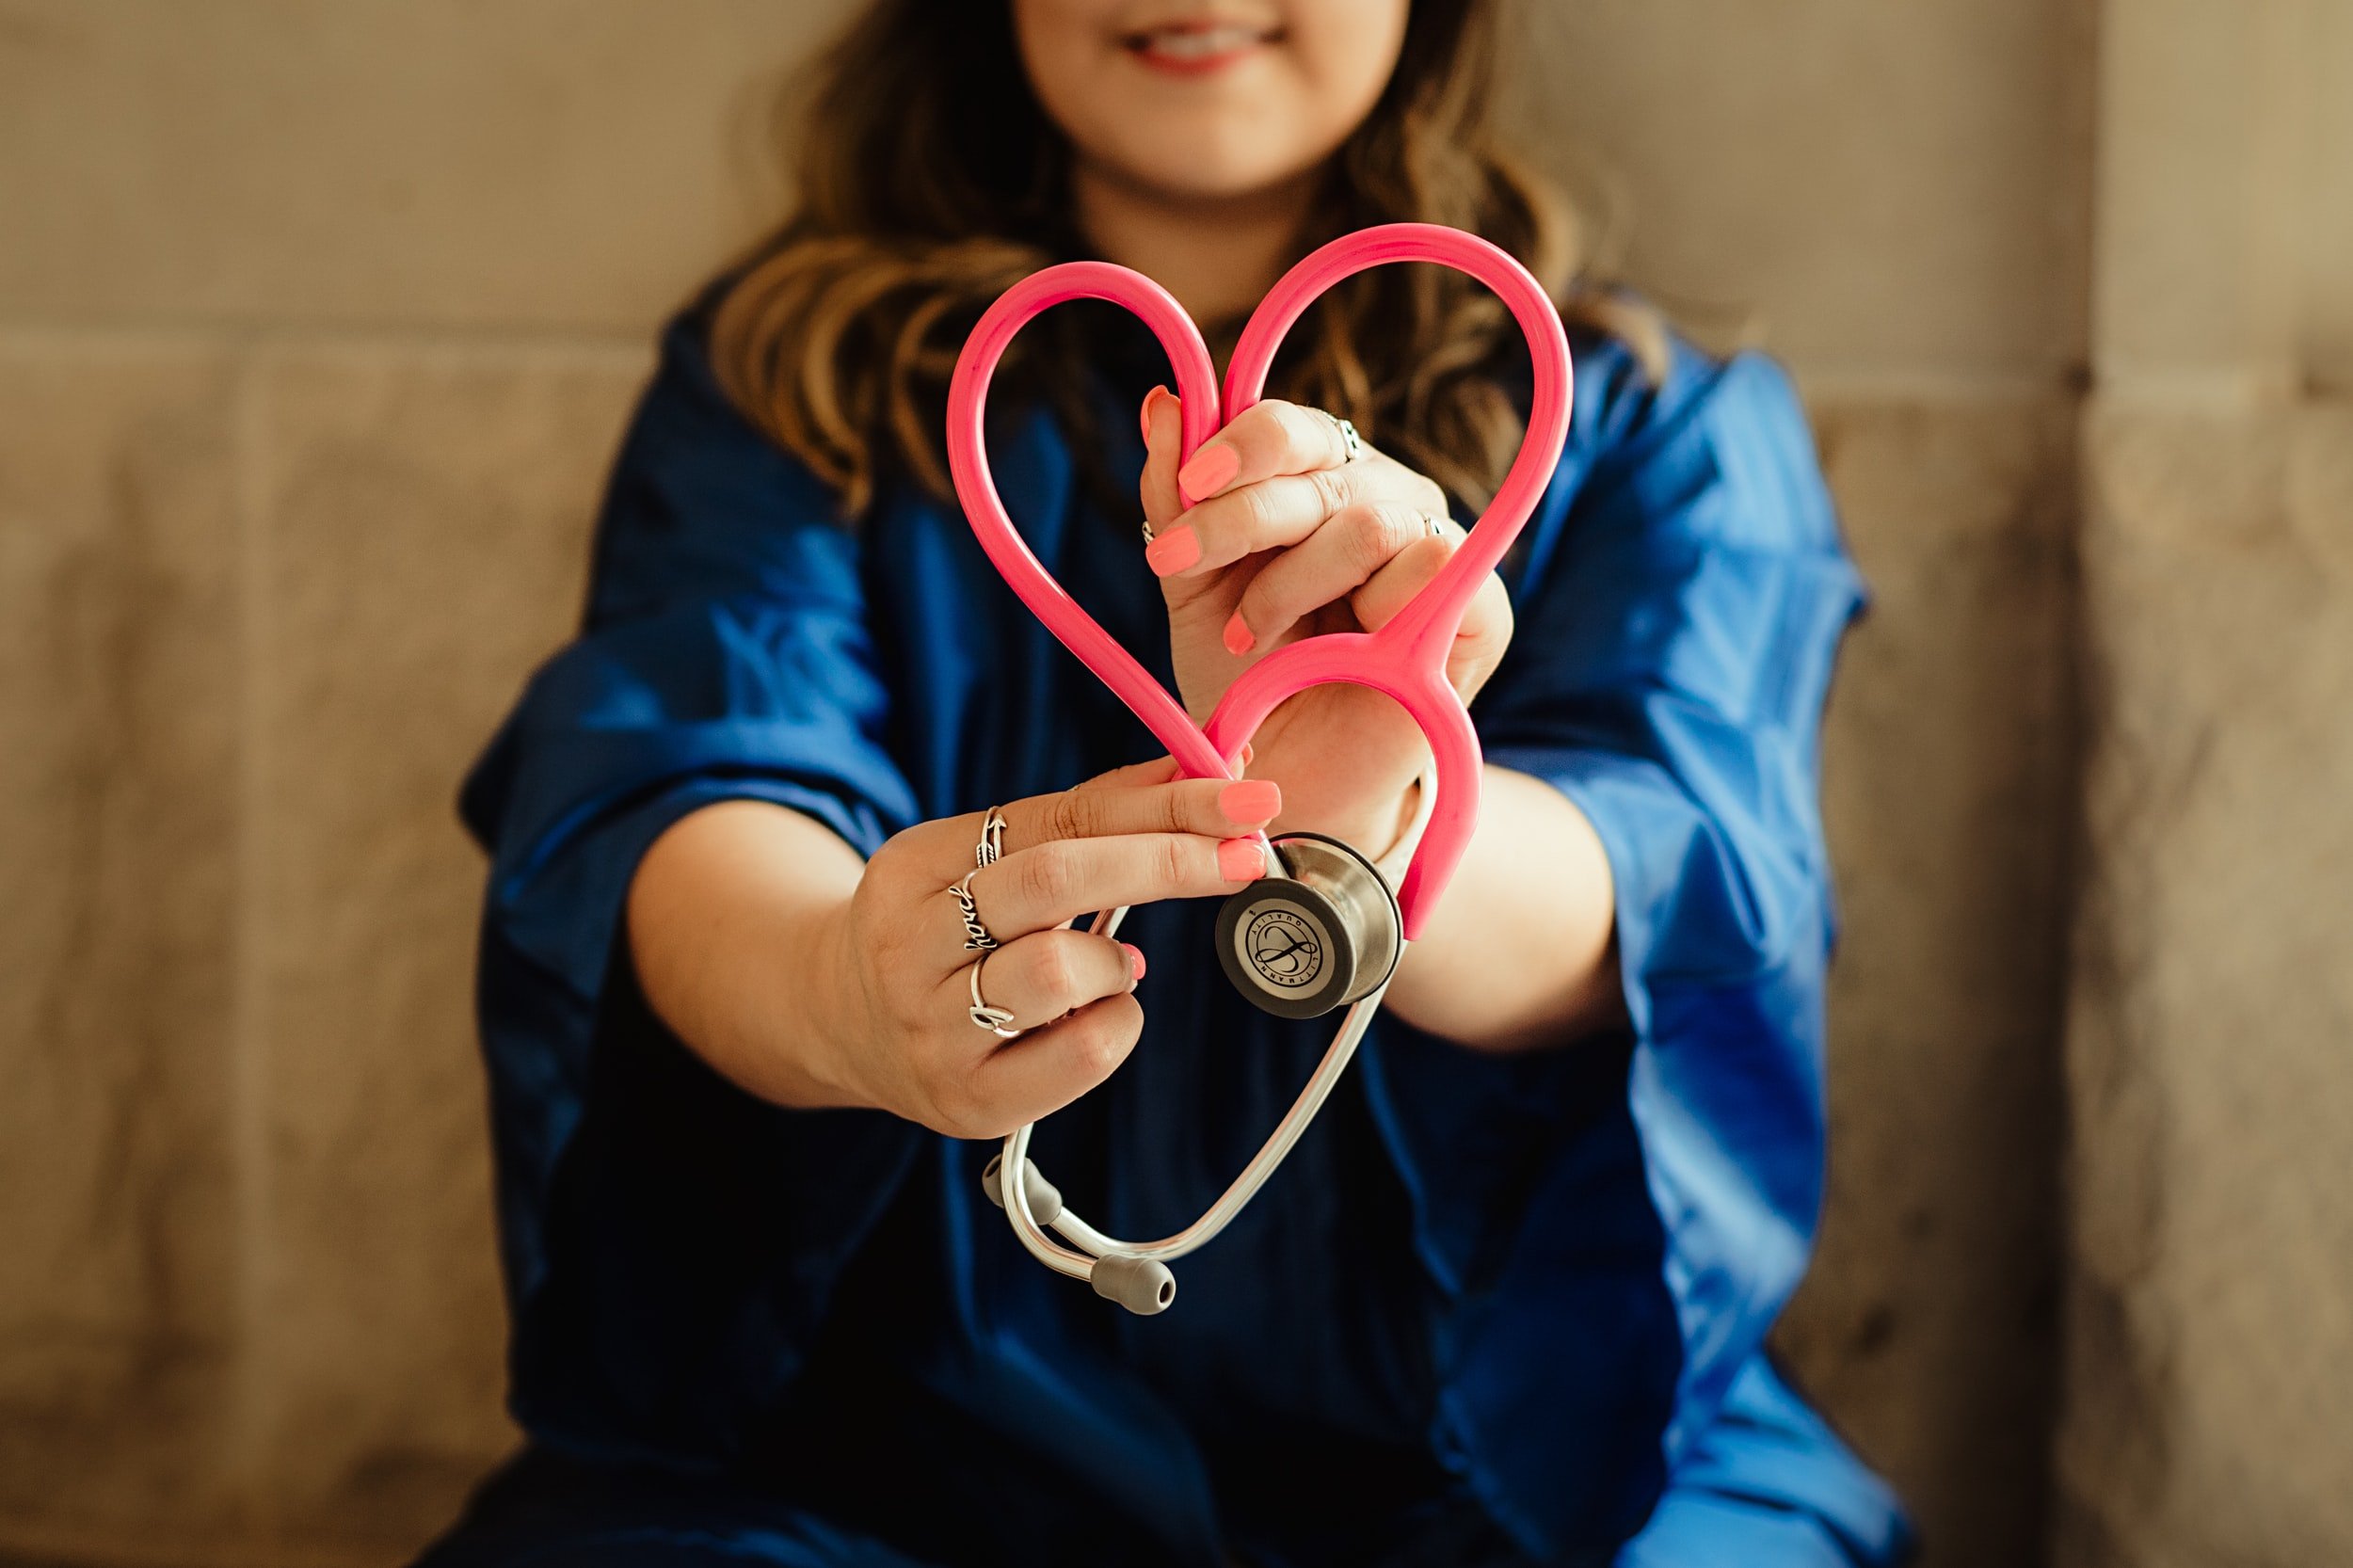 A nurse holding a pink stethoscope in the shape of a heart.